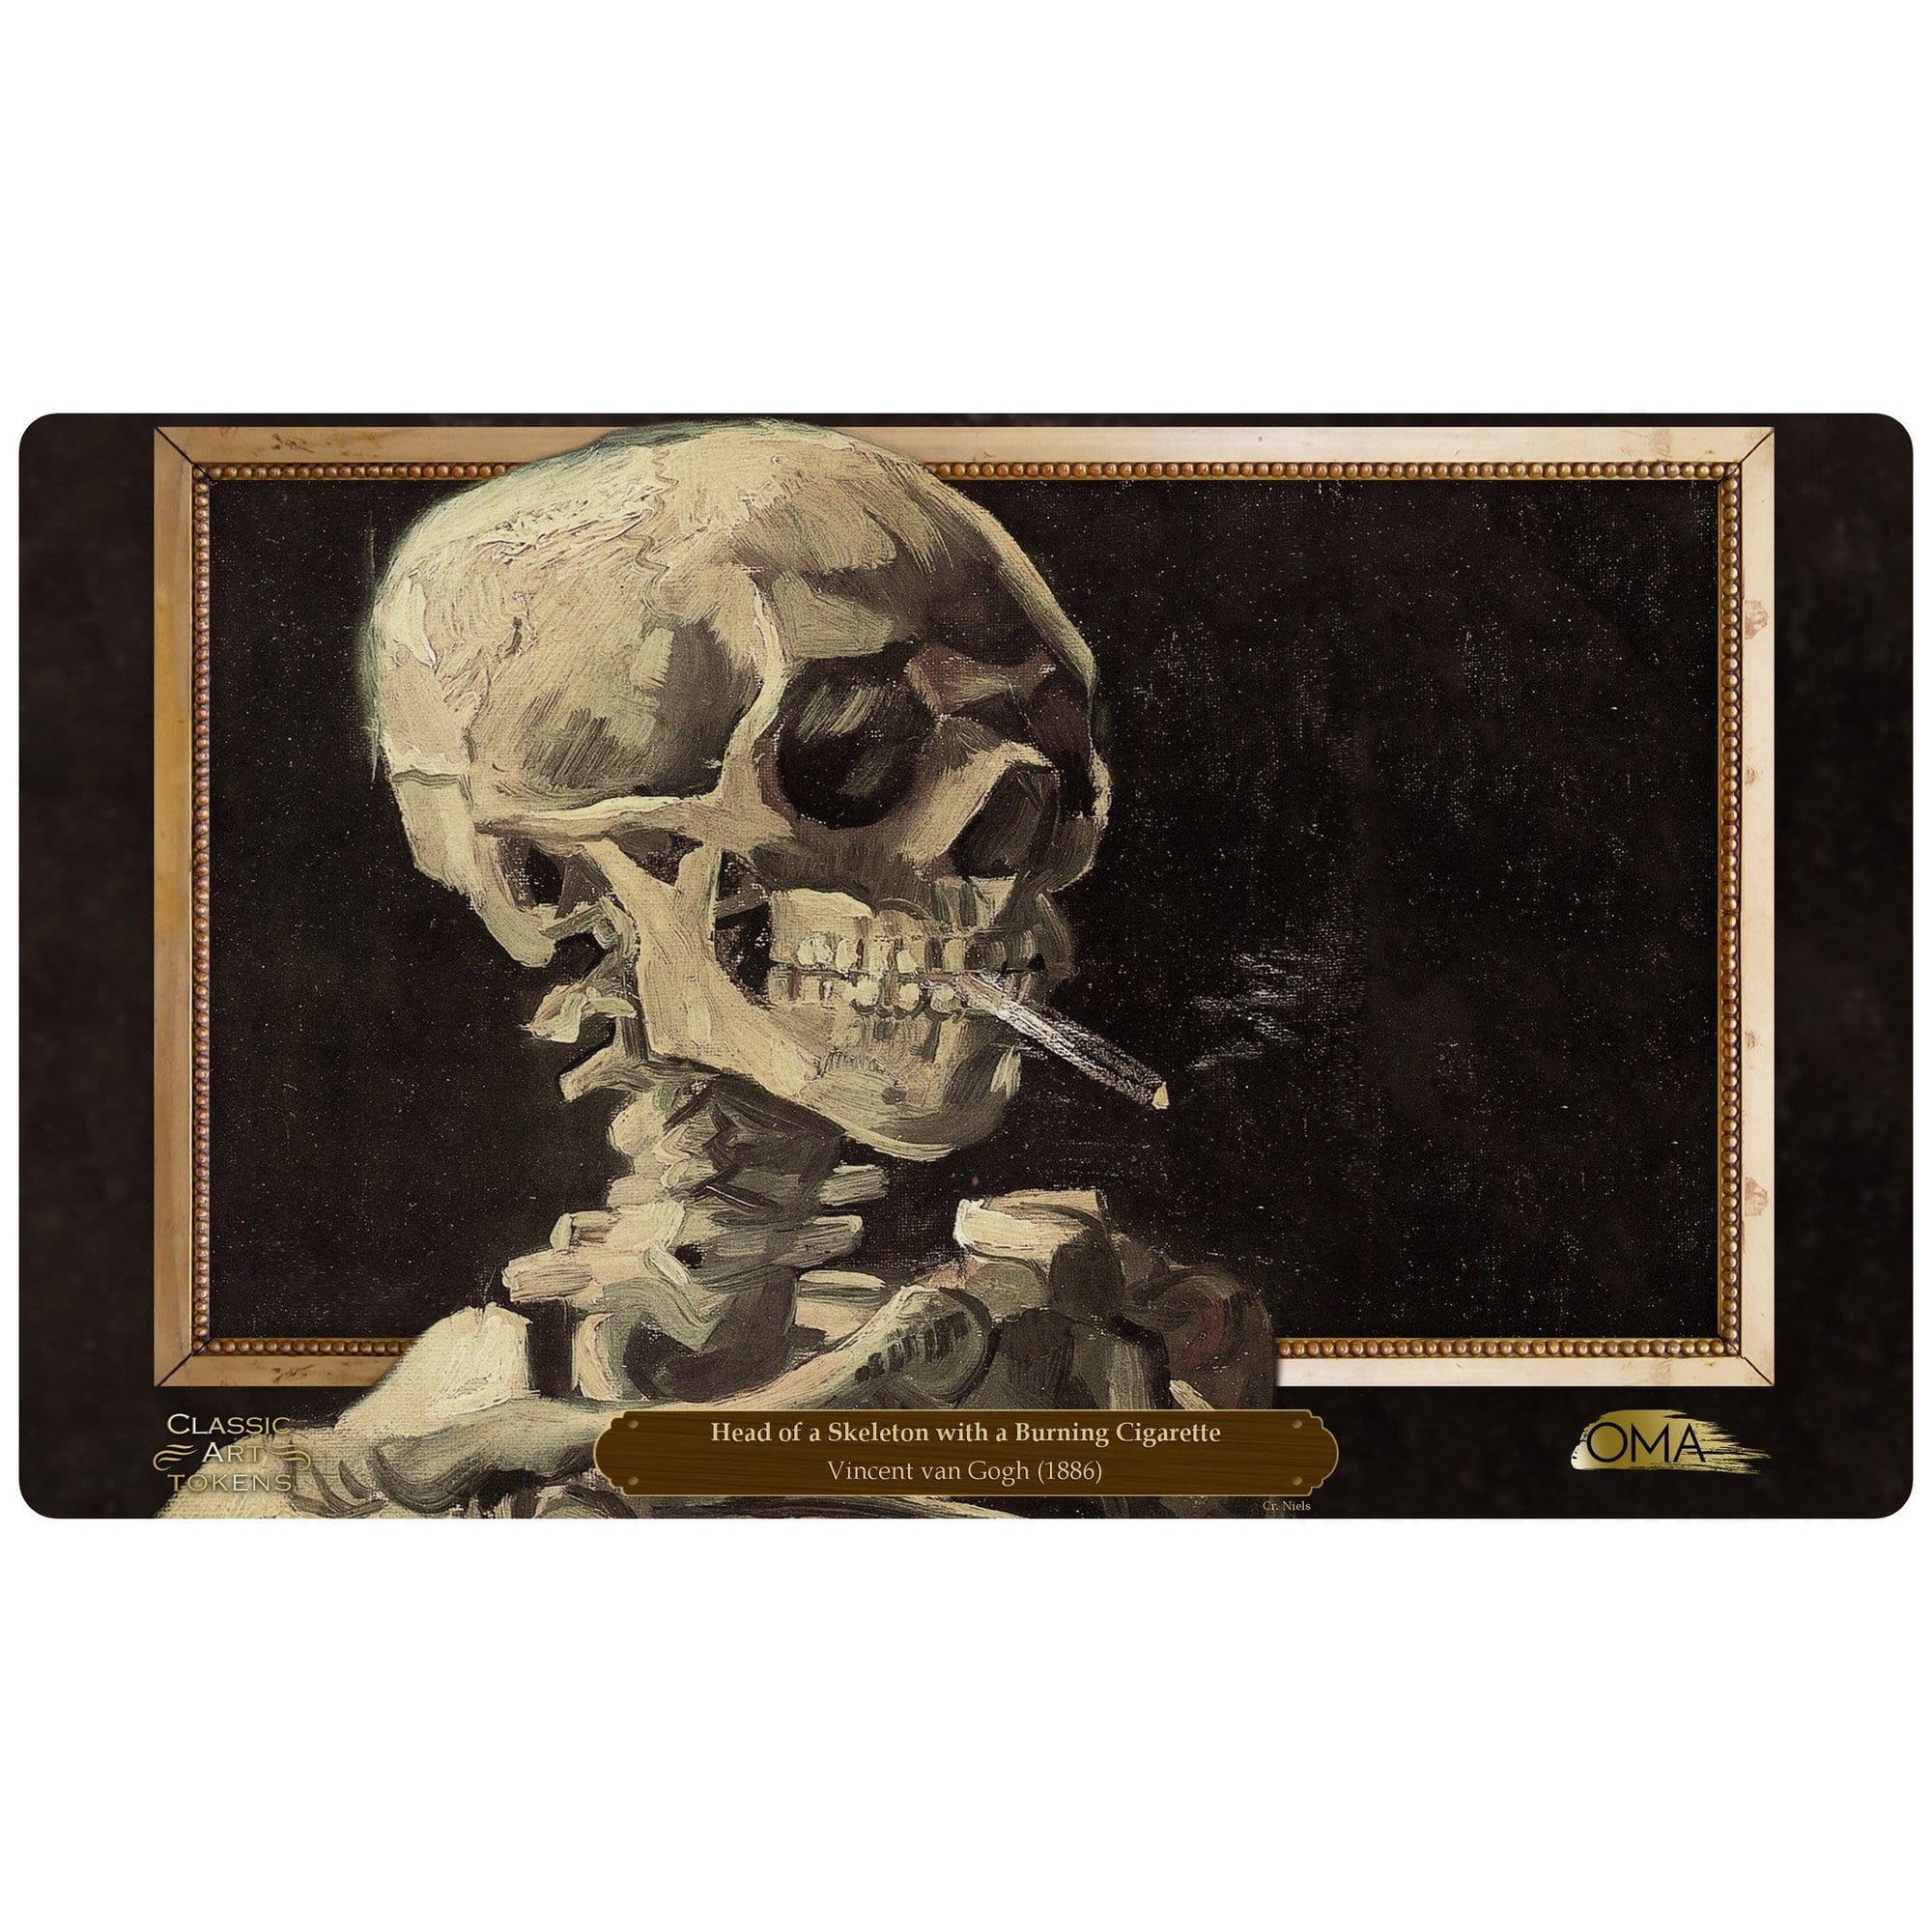 Zombie Playmat by Vincent van Gogh - Playmat - Original Magic Art - Accessories for Magic the Gathering and other card games